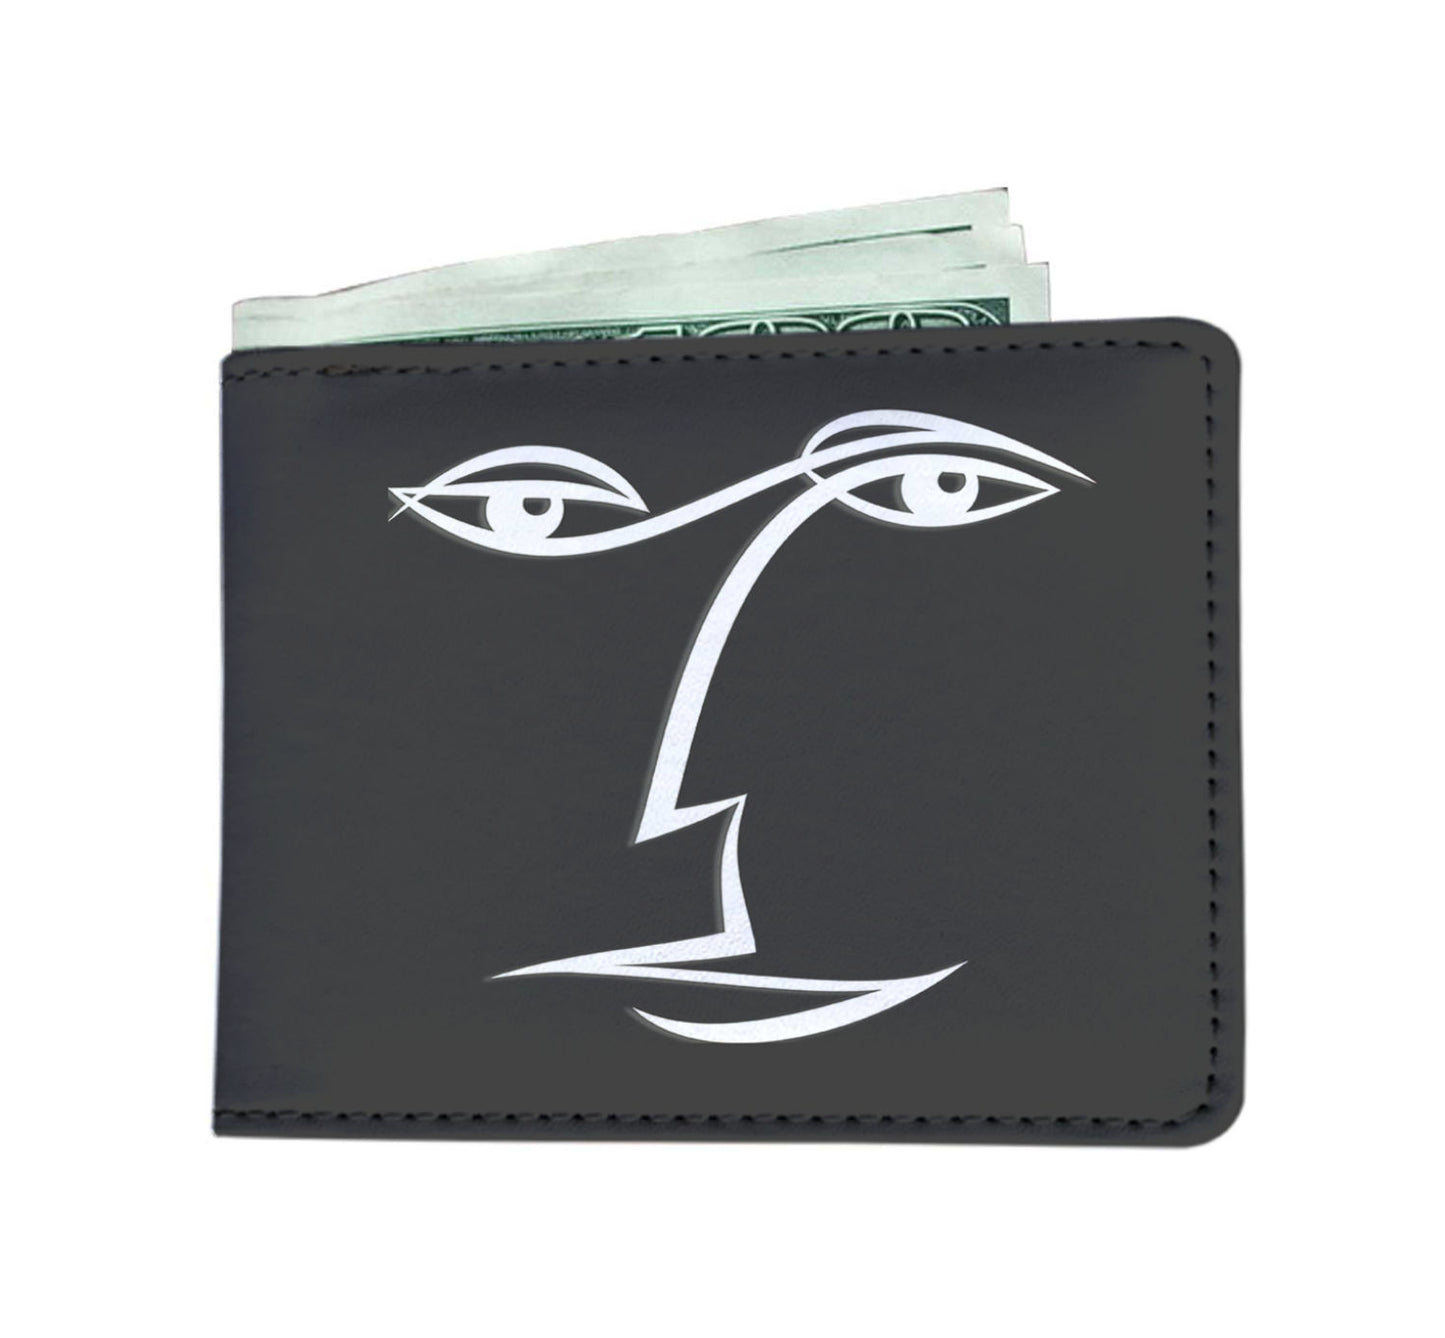 FaceTime Men's Wallet from Vluxe by Lucky Nahum